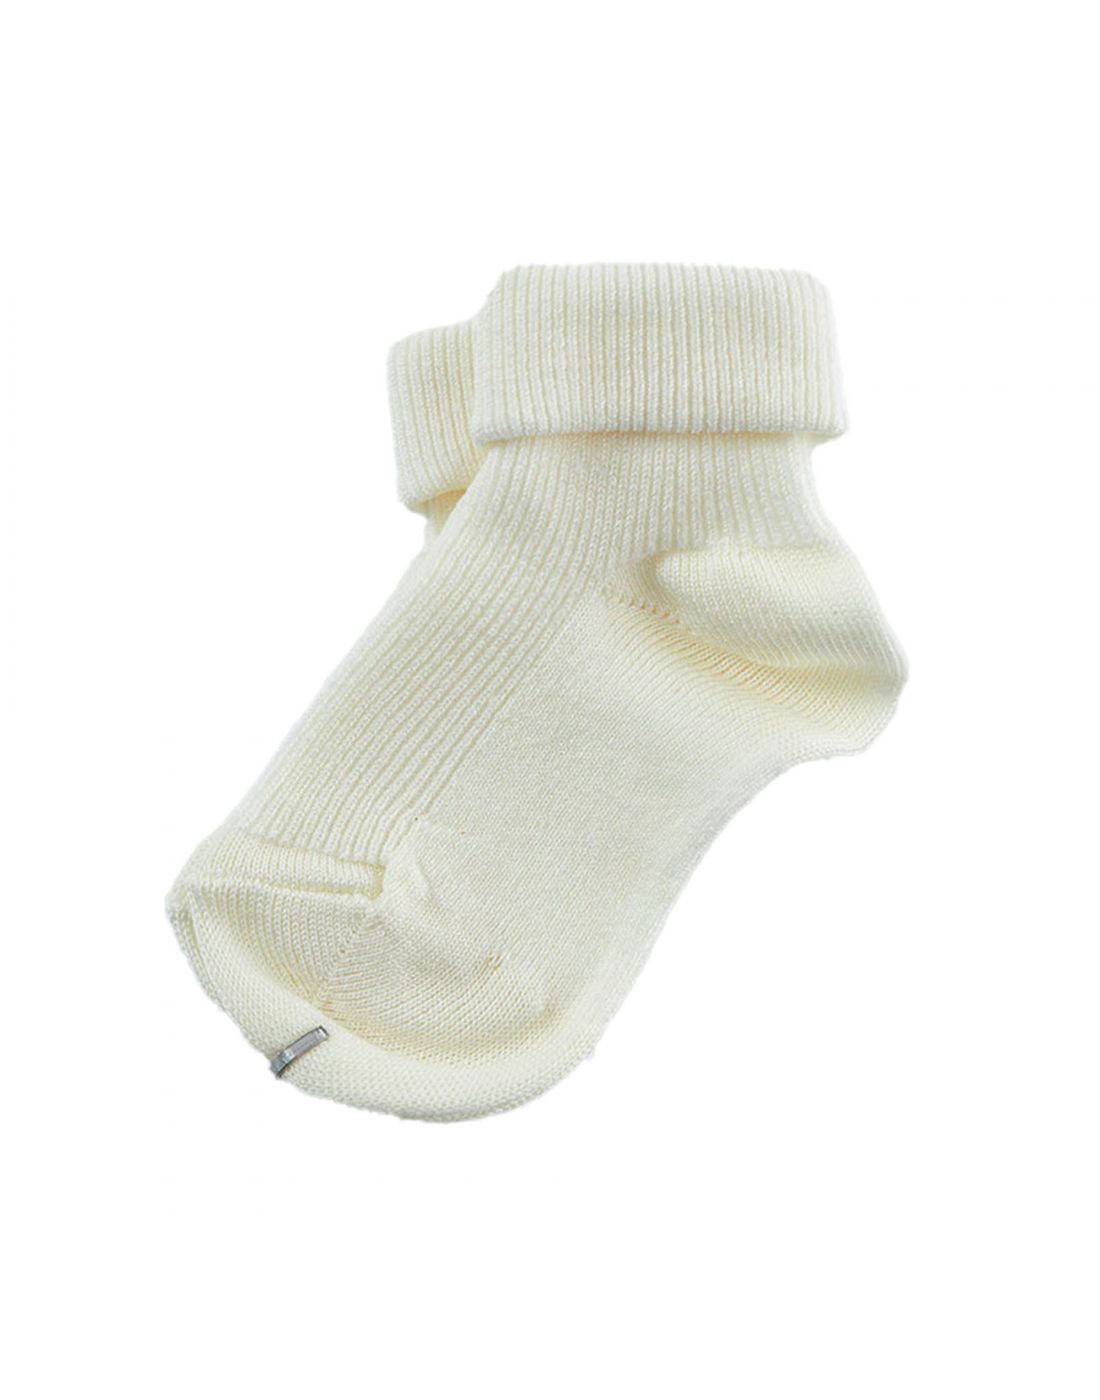 Condor baby terry booties with folded cuff